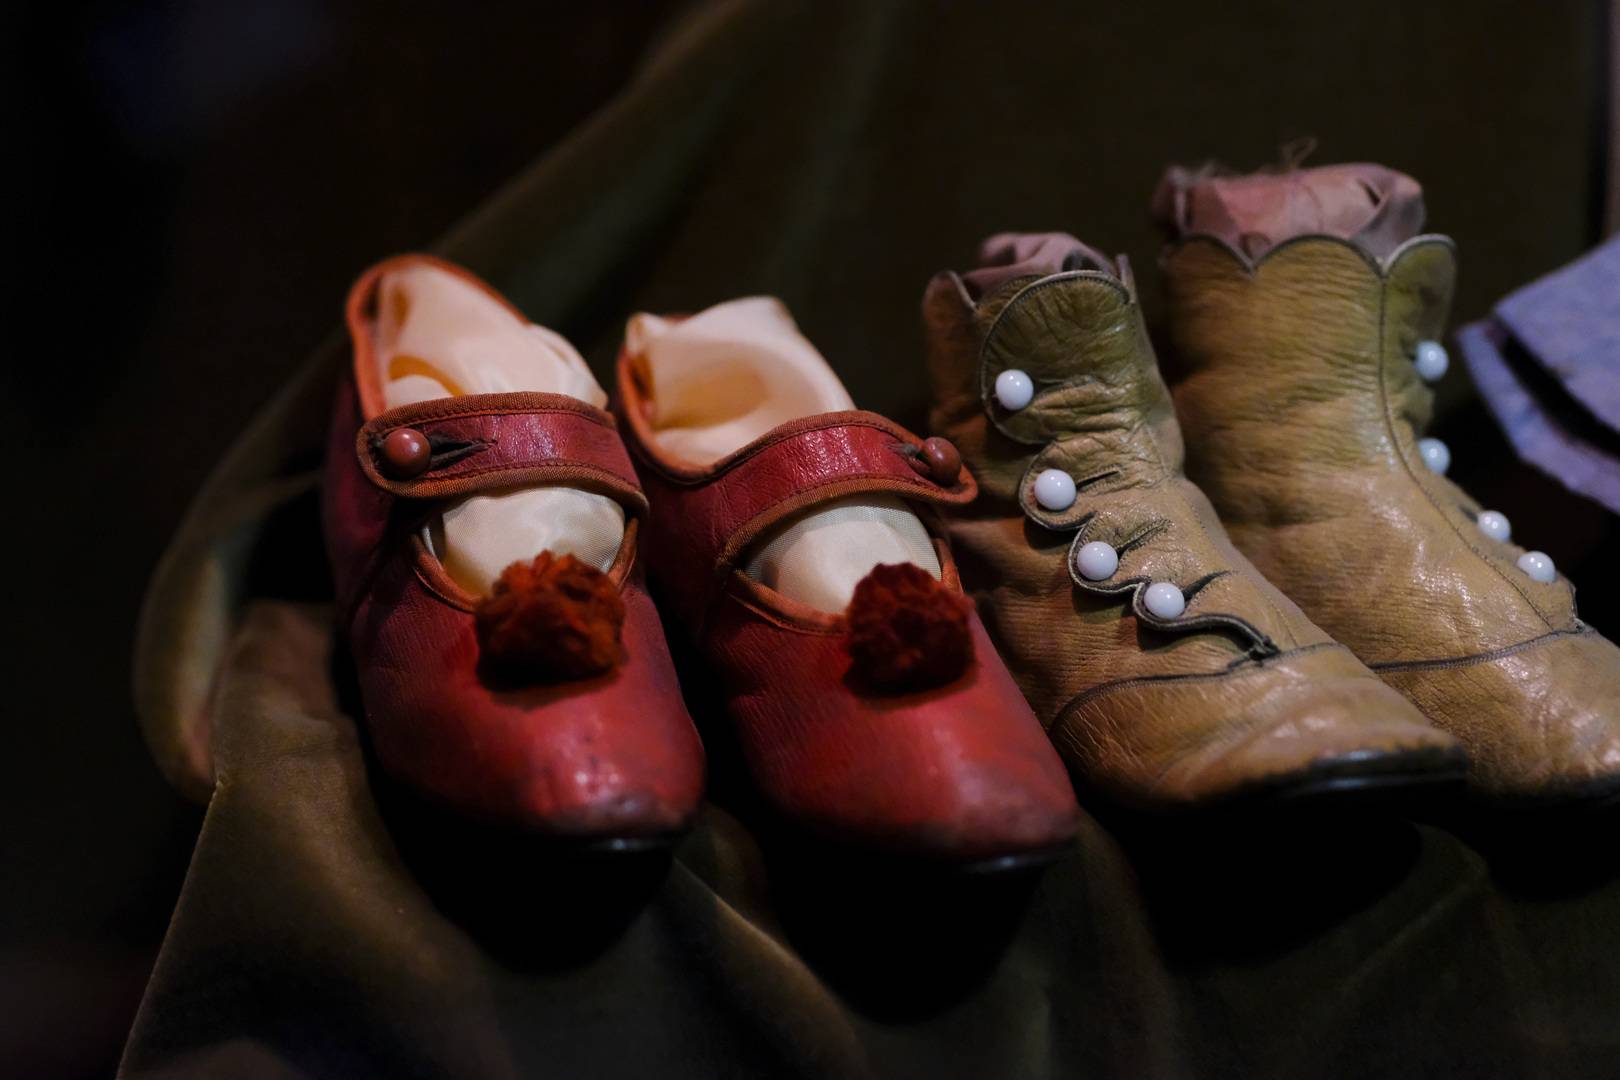 Two pairs of children's shoes placed together on display in Museum of Childhood